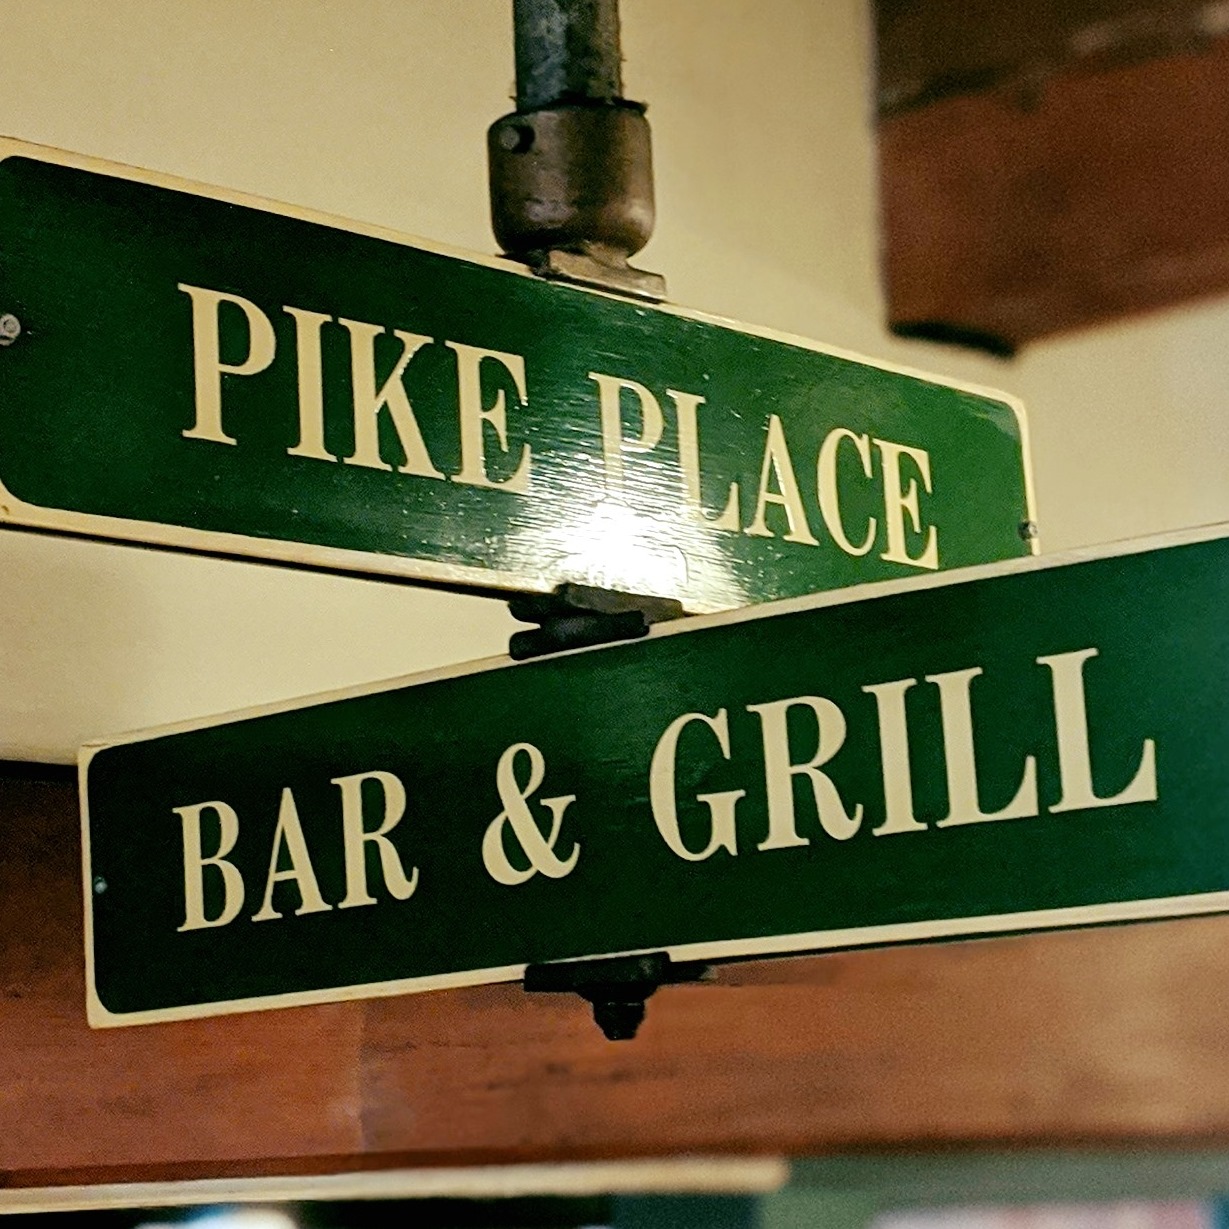 Company logo of Pike Place Bar & Grill